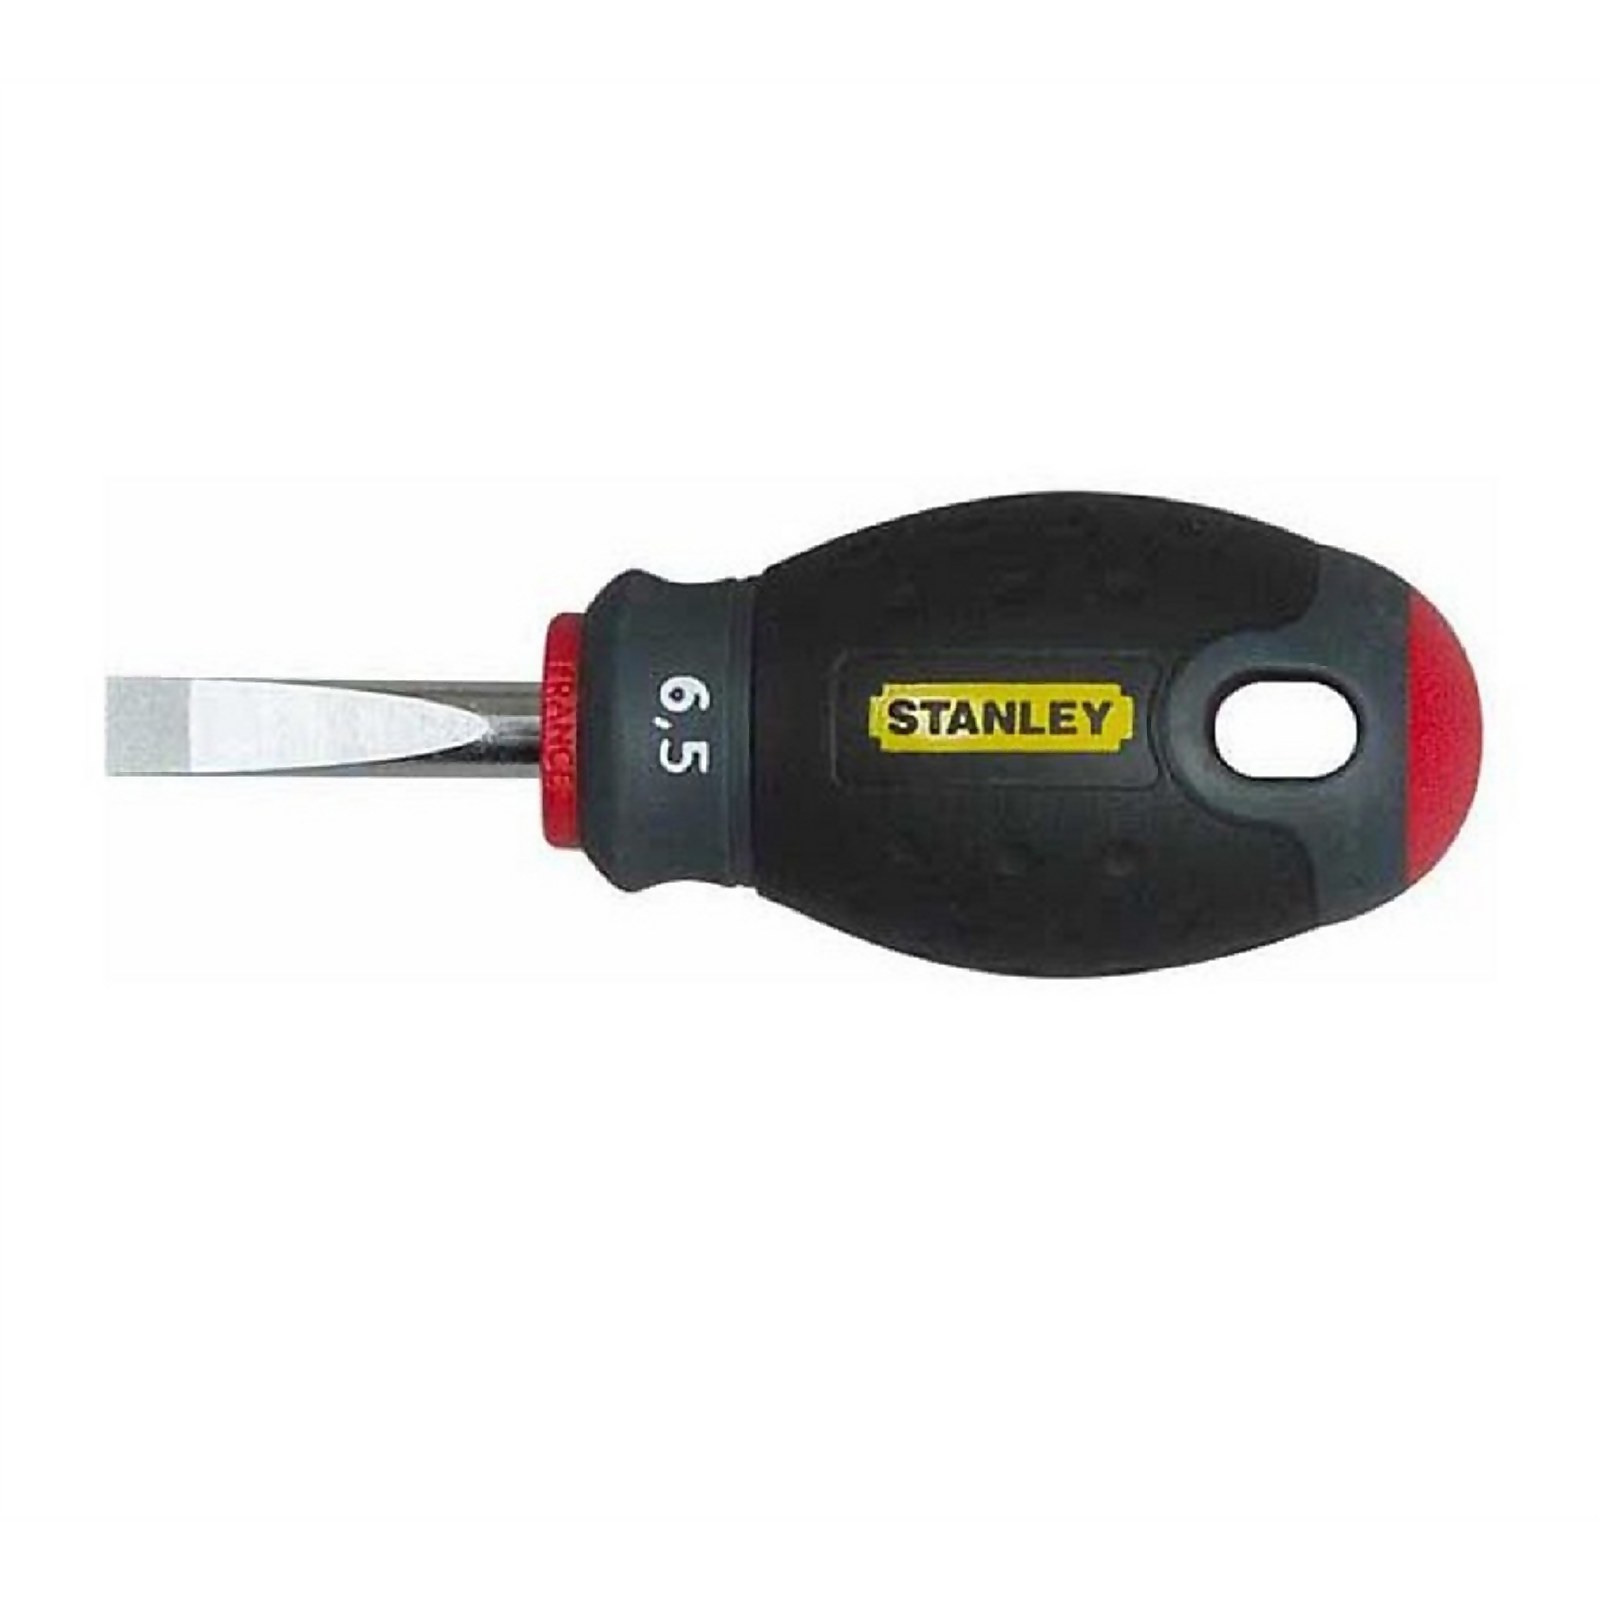 Photo of Stanley Fatmax Parallel Stubby Screwdriver - 6.5x30mm